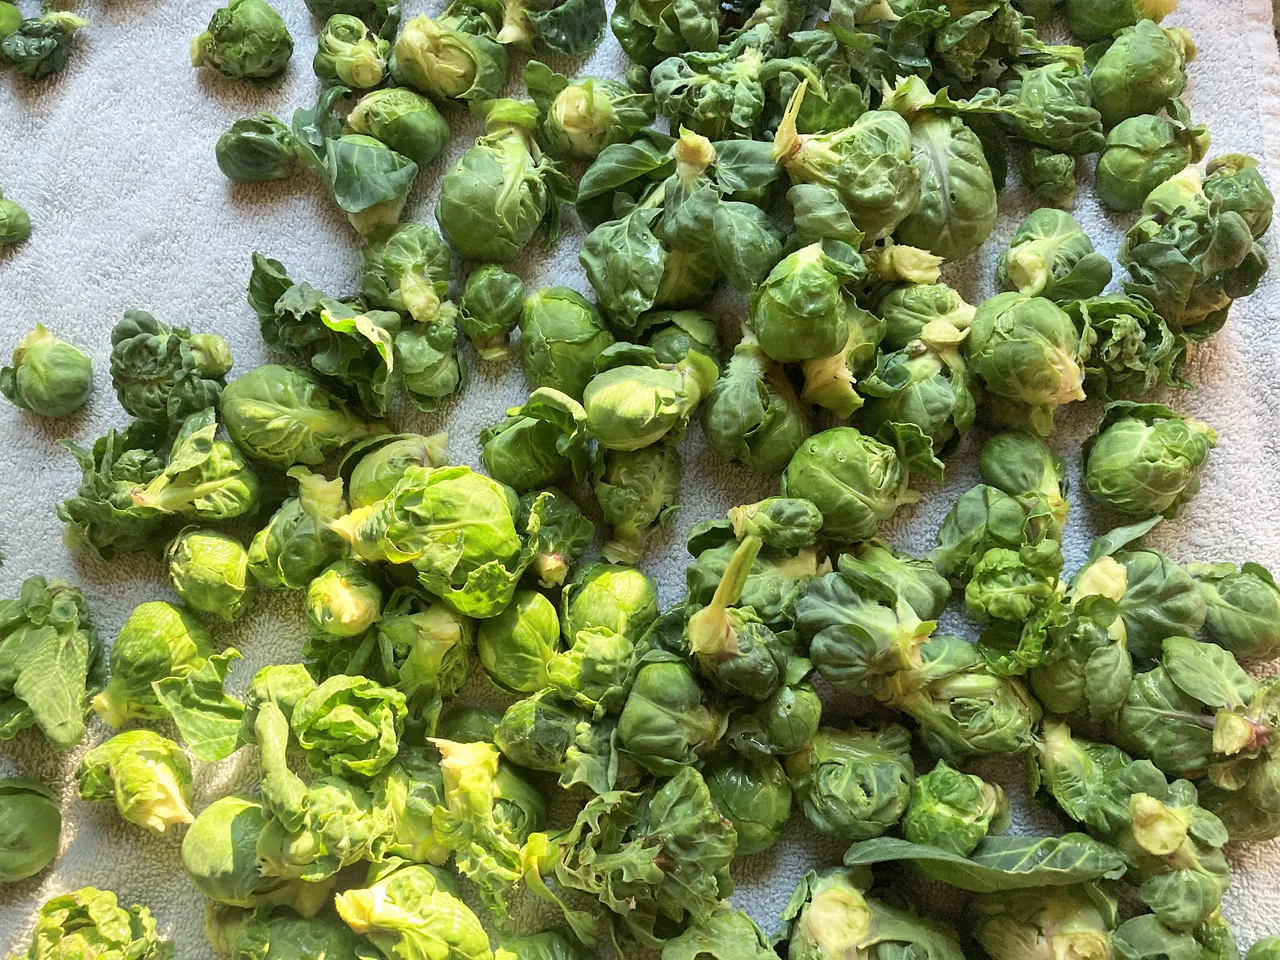 Drying brussel sprouts